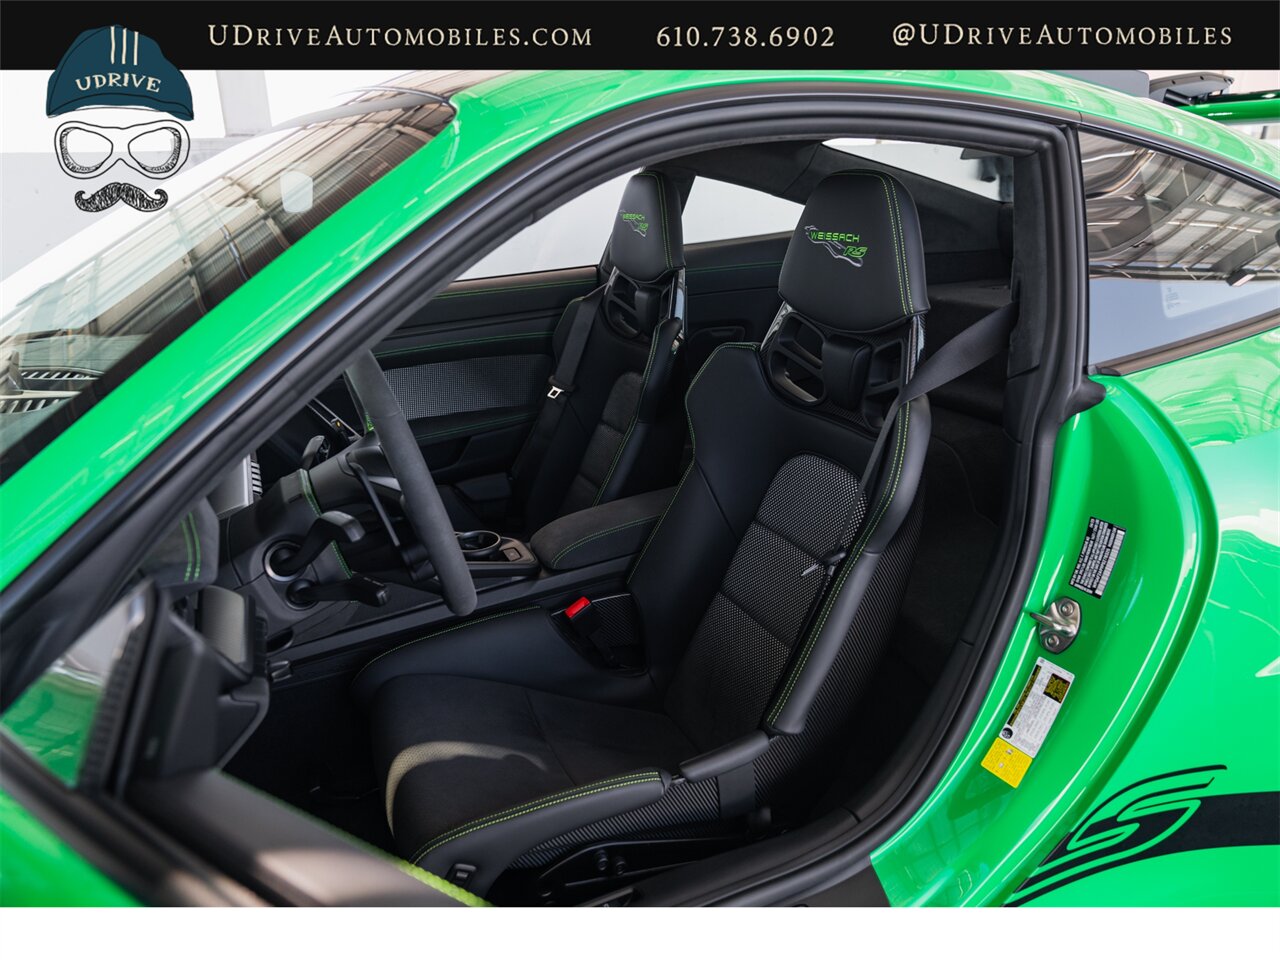 2023 Porsche 911 GT3 RS  Weissach Pkg FAL Full Body PPF $43k in Extras - Photo 42 - West Chester, PA 19382